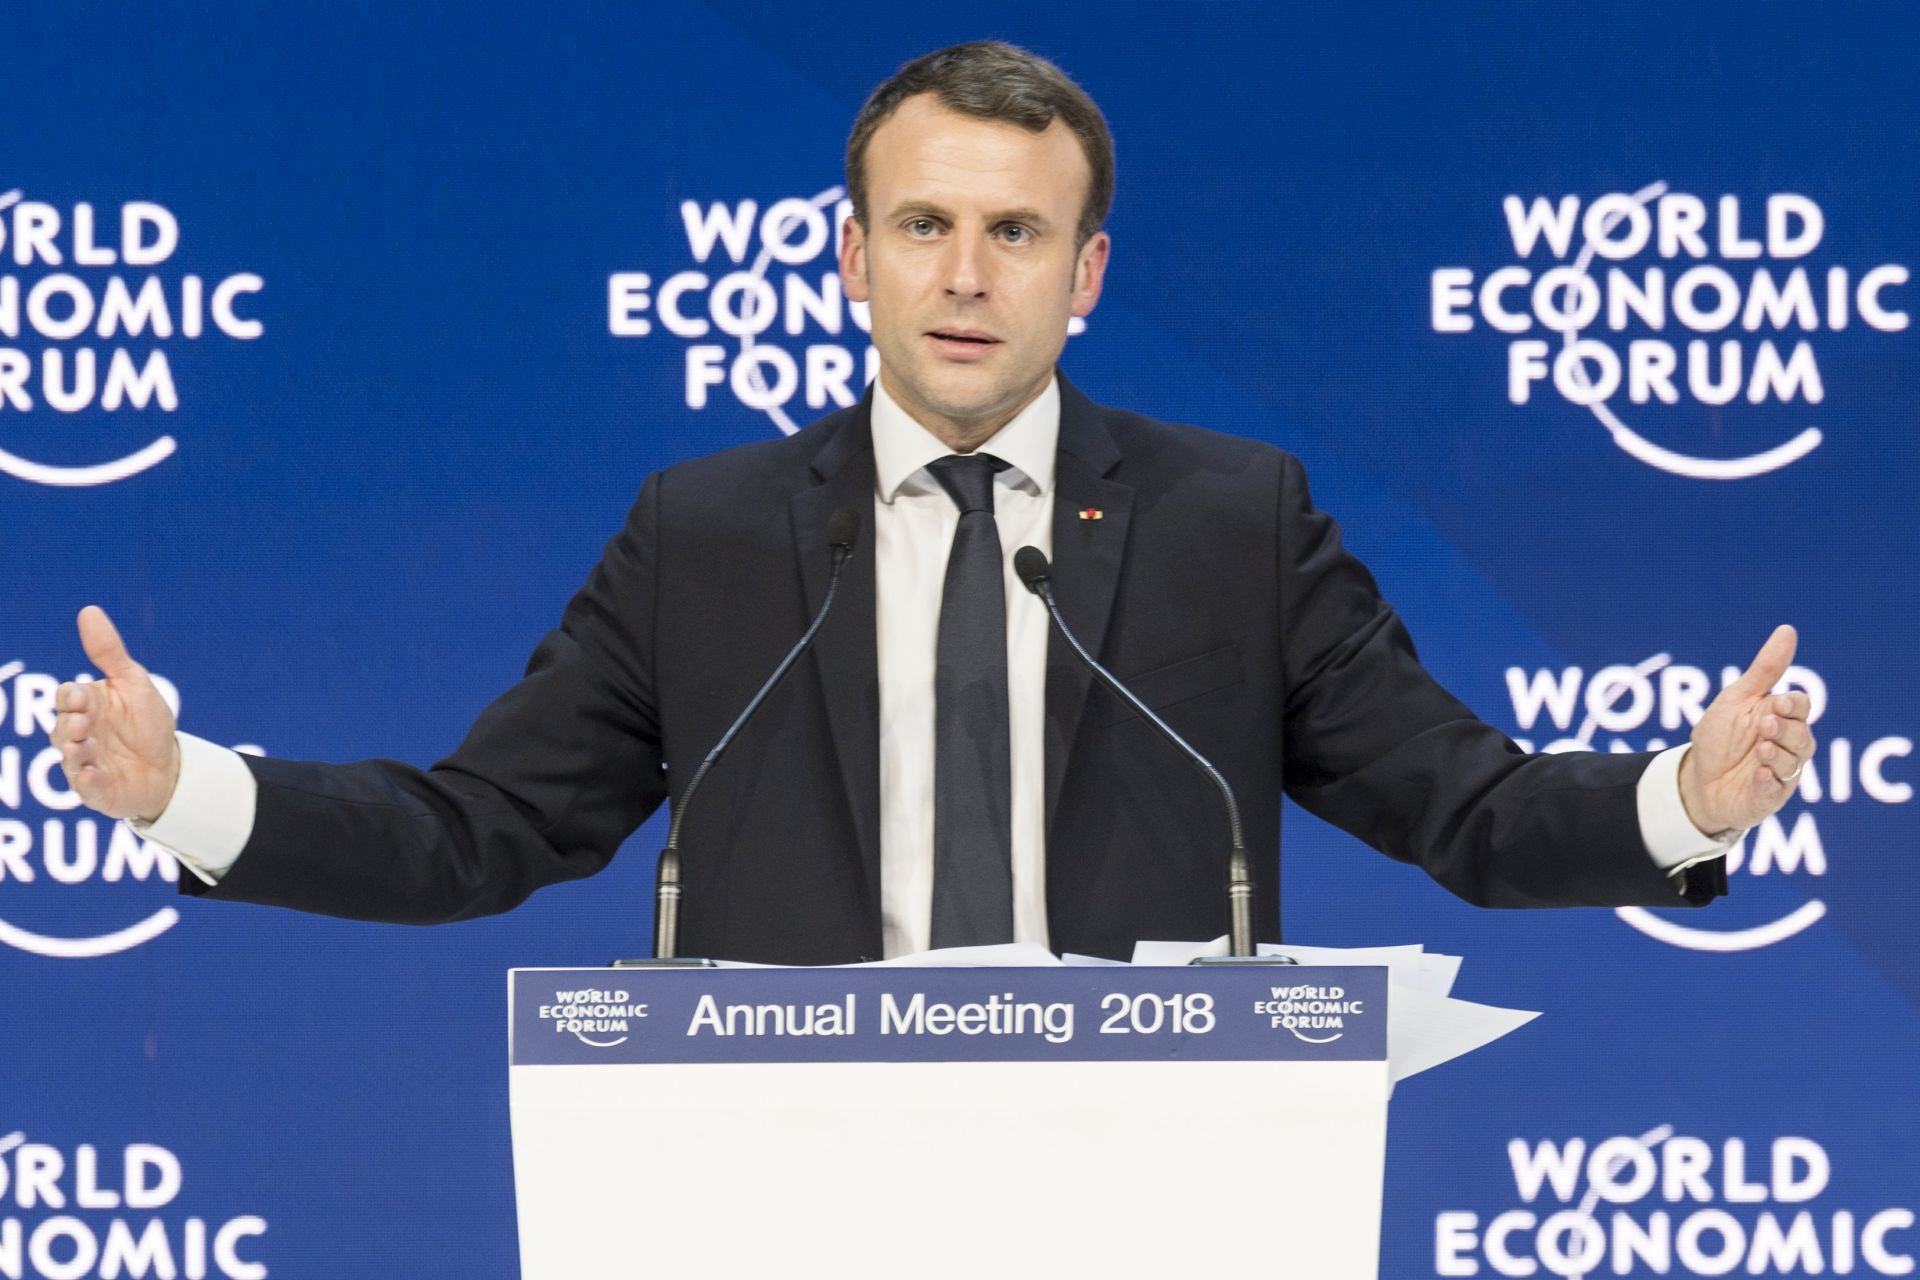 epa06471307 Emmanuel Macron, President of France, adresses a plenary session during the 48th Annual Meeting of the World Economic Forum, WEF, in Davos, Switzerland, 24 January 2018. The meeting brings together entrepreneurs, scientists, corporate and political leaders in Davos, from 23 to 26 January.  EPA/LAURENT GILLIERON